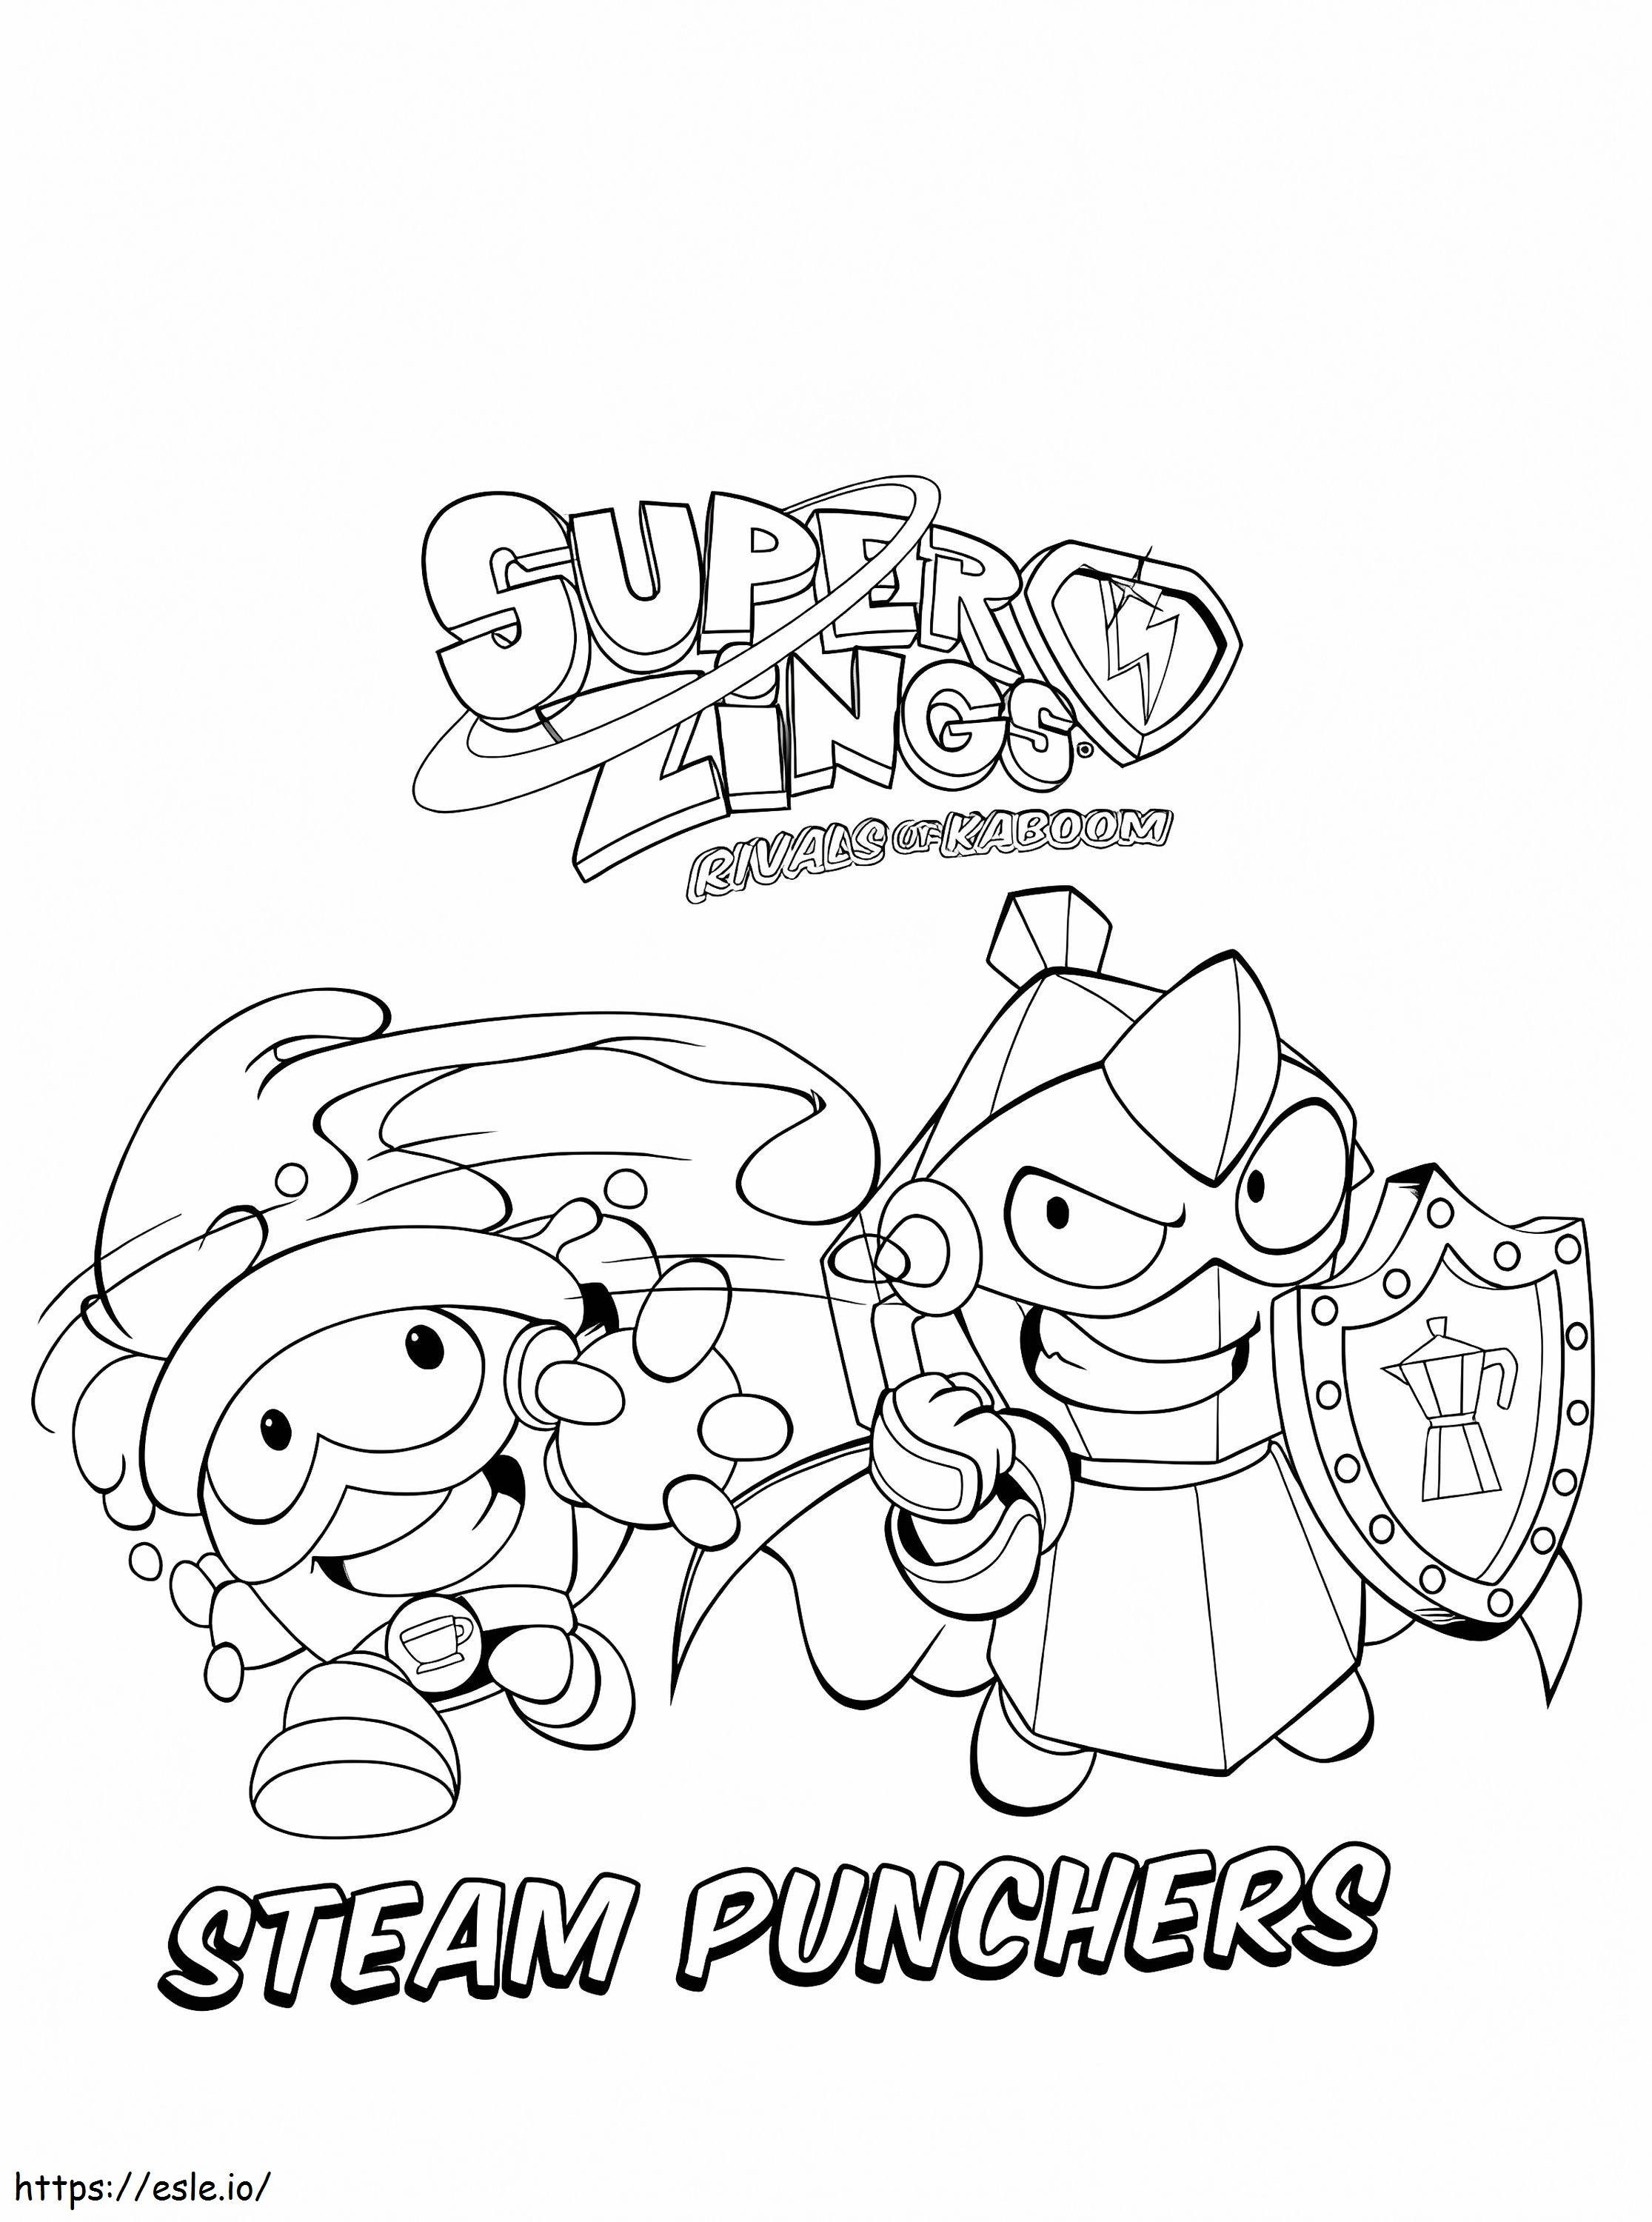 Steam Punchers Superzings coloring page